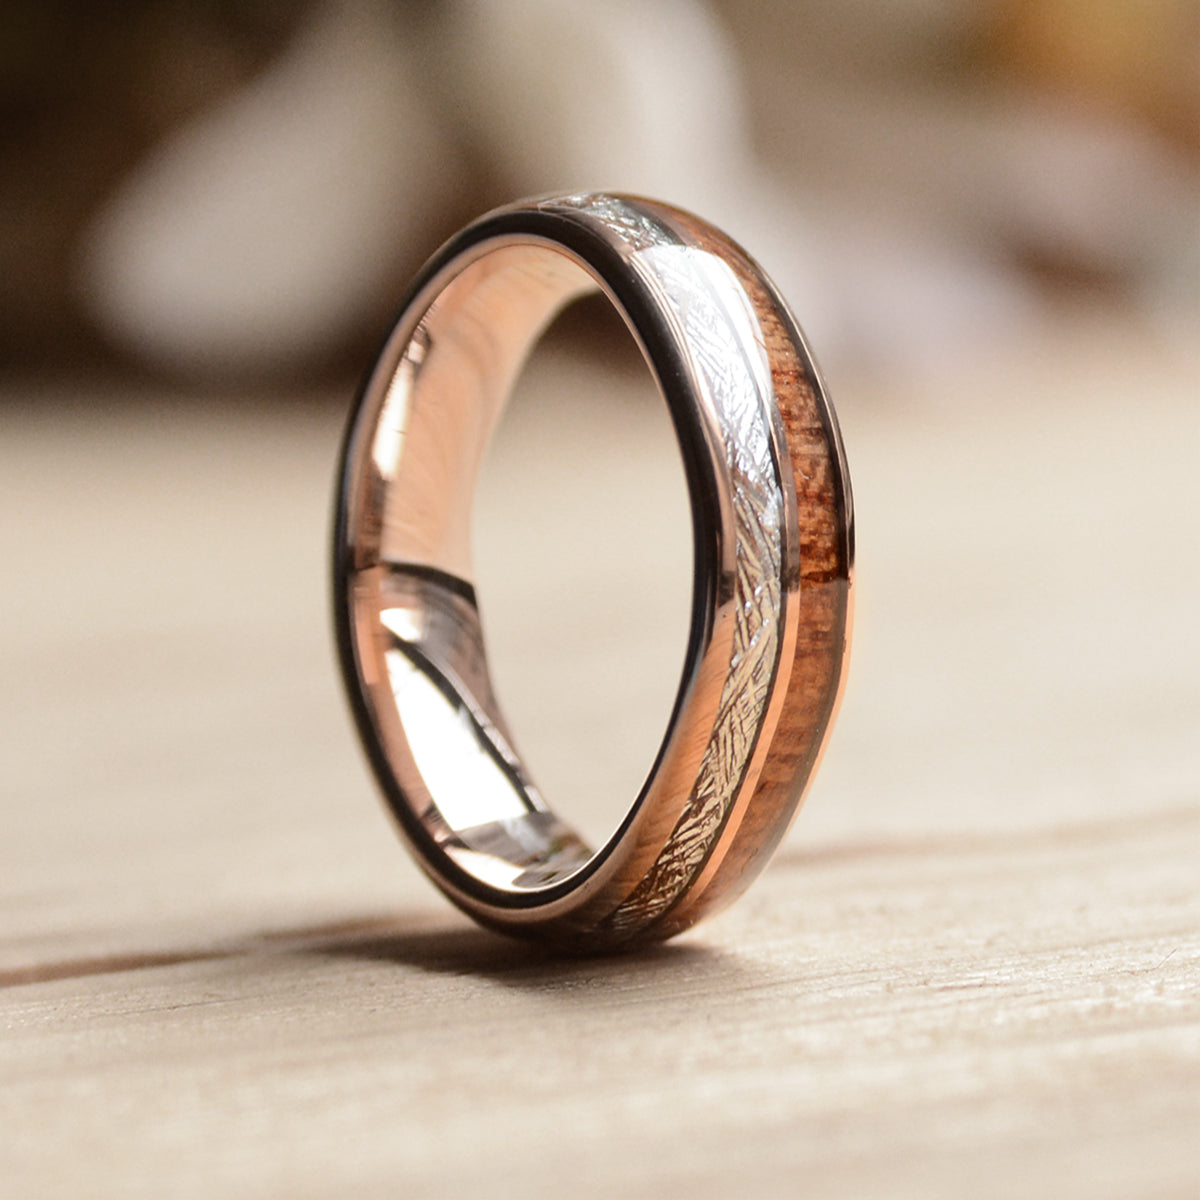 Wooden ring, promise rings for couples, engraved ring, wood ring, mens  ring, personalized ring, wedding ring